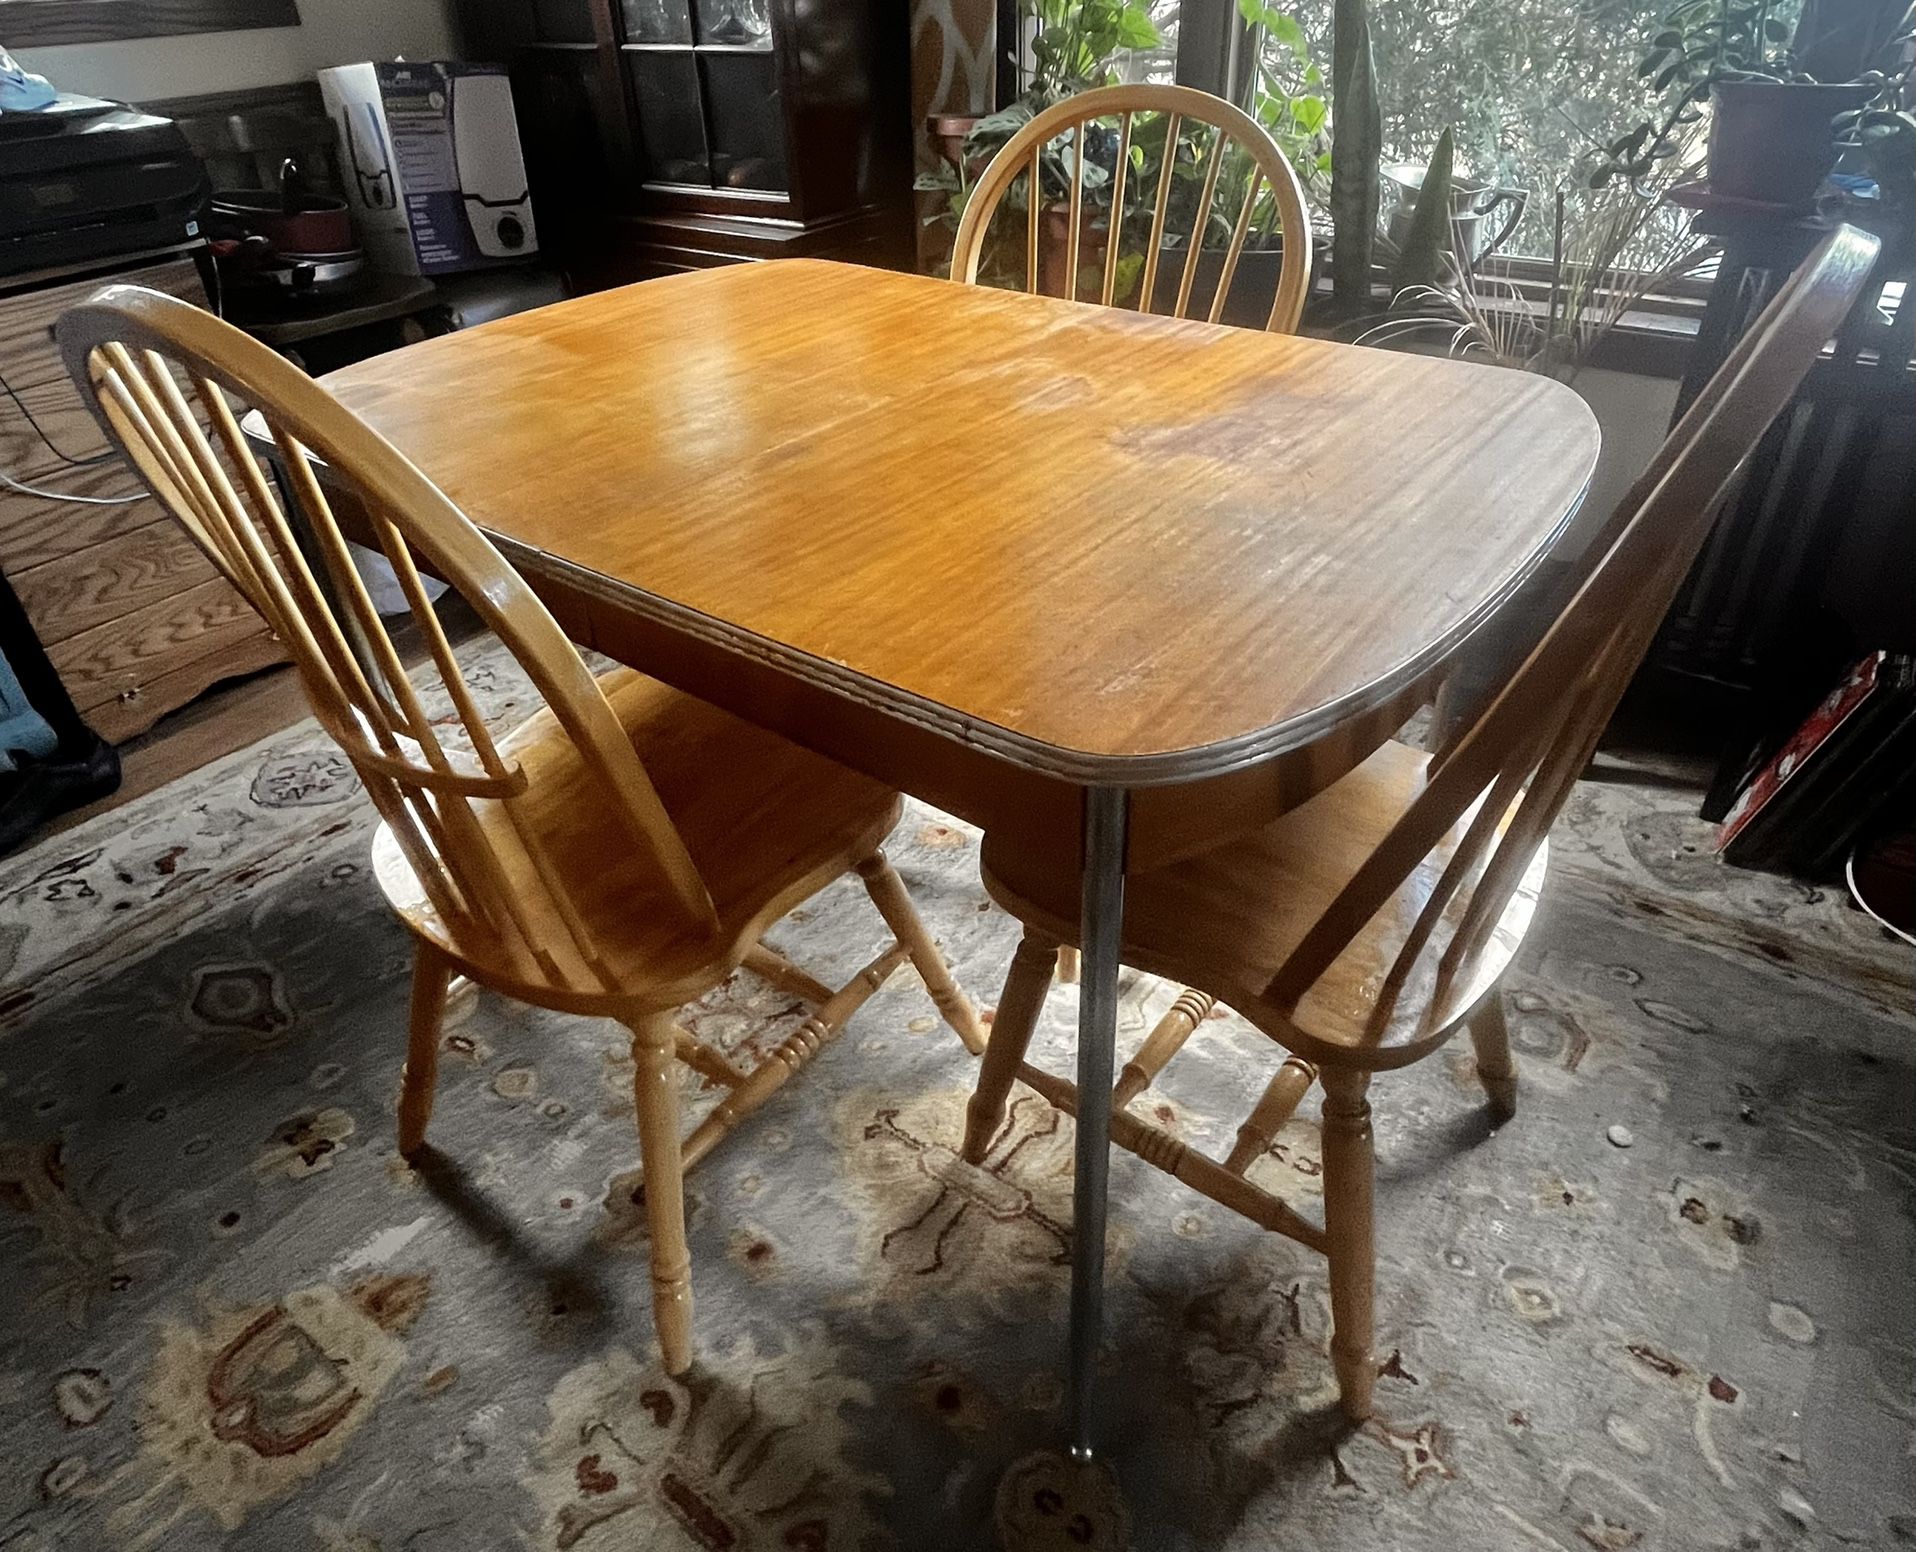 1940 Deco Style Kitchen Table w/Leaf and 3 Hardwood Windsor Chairs